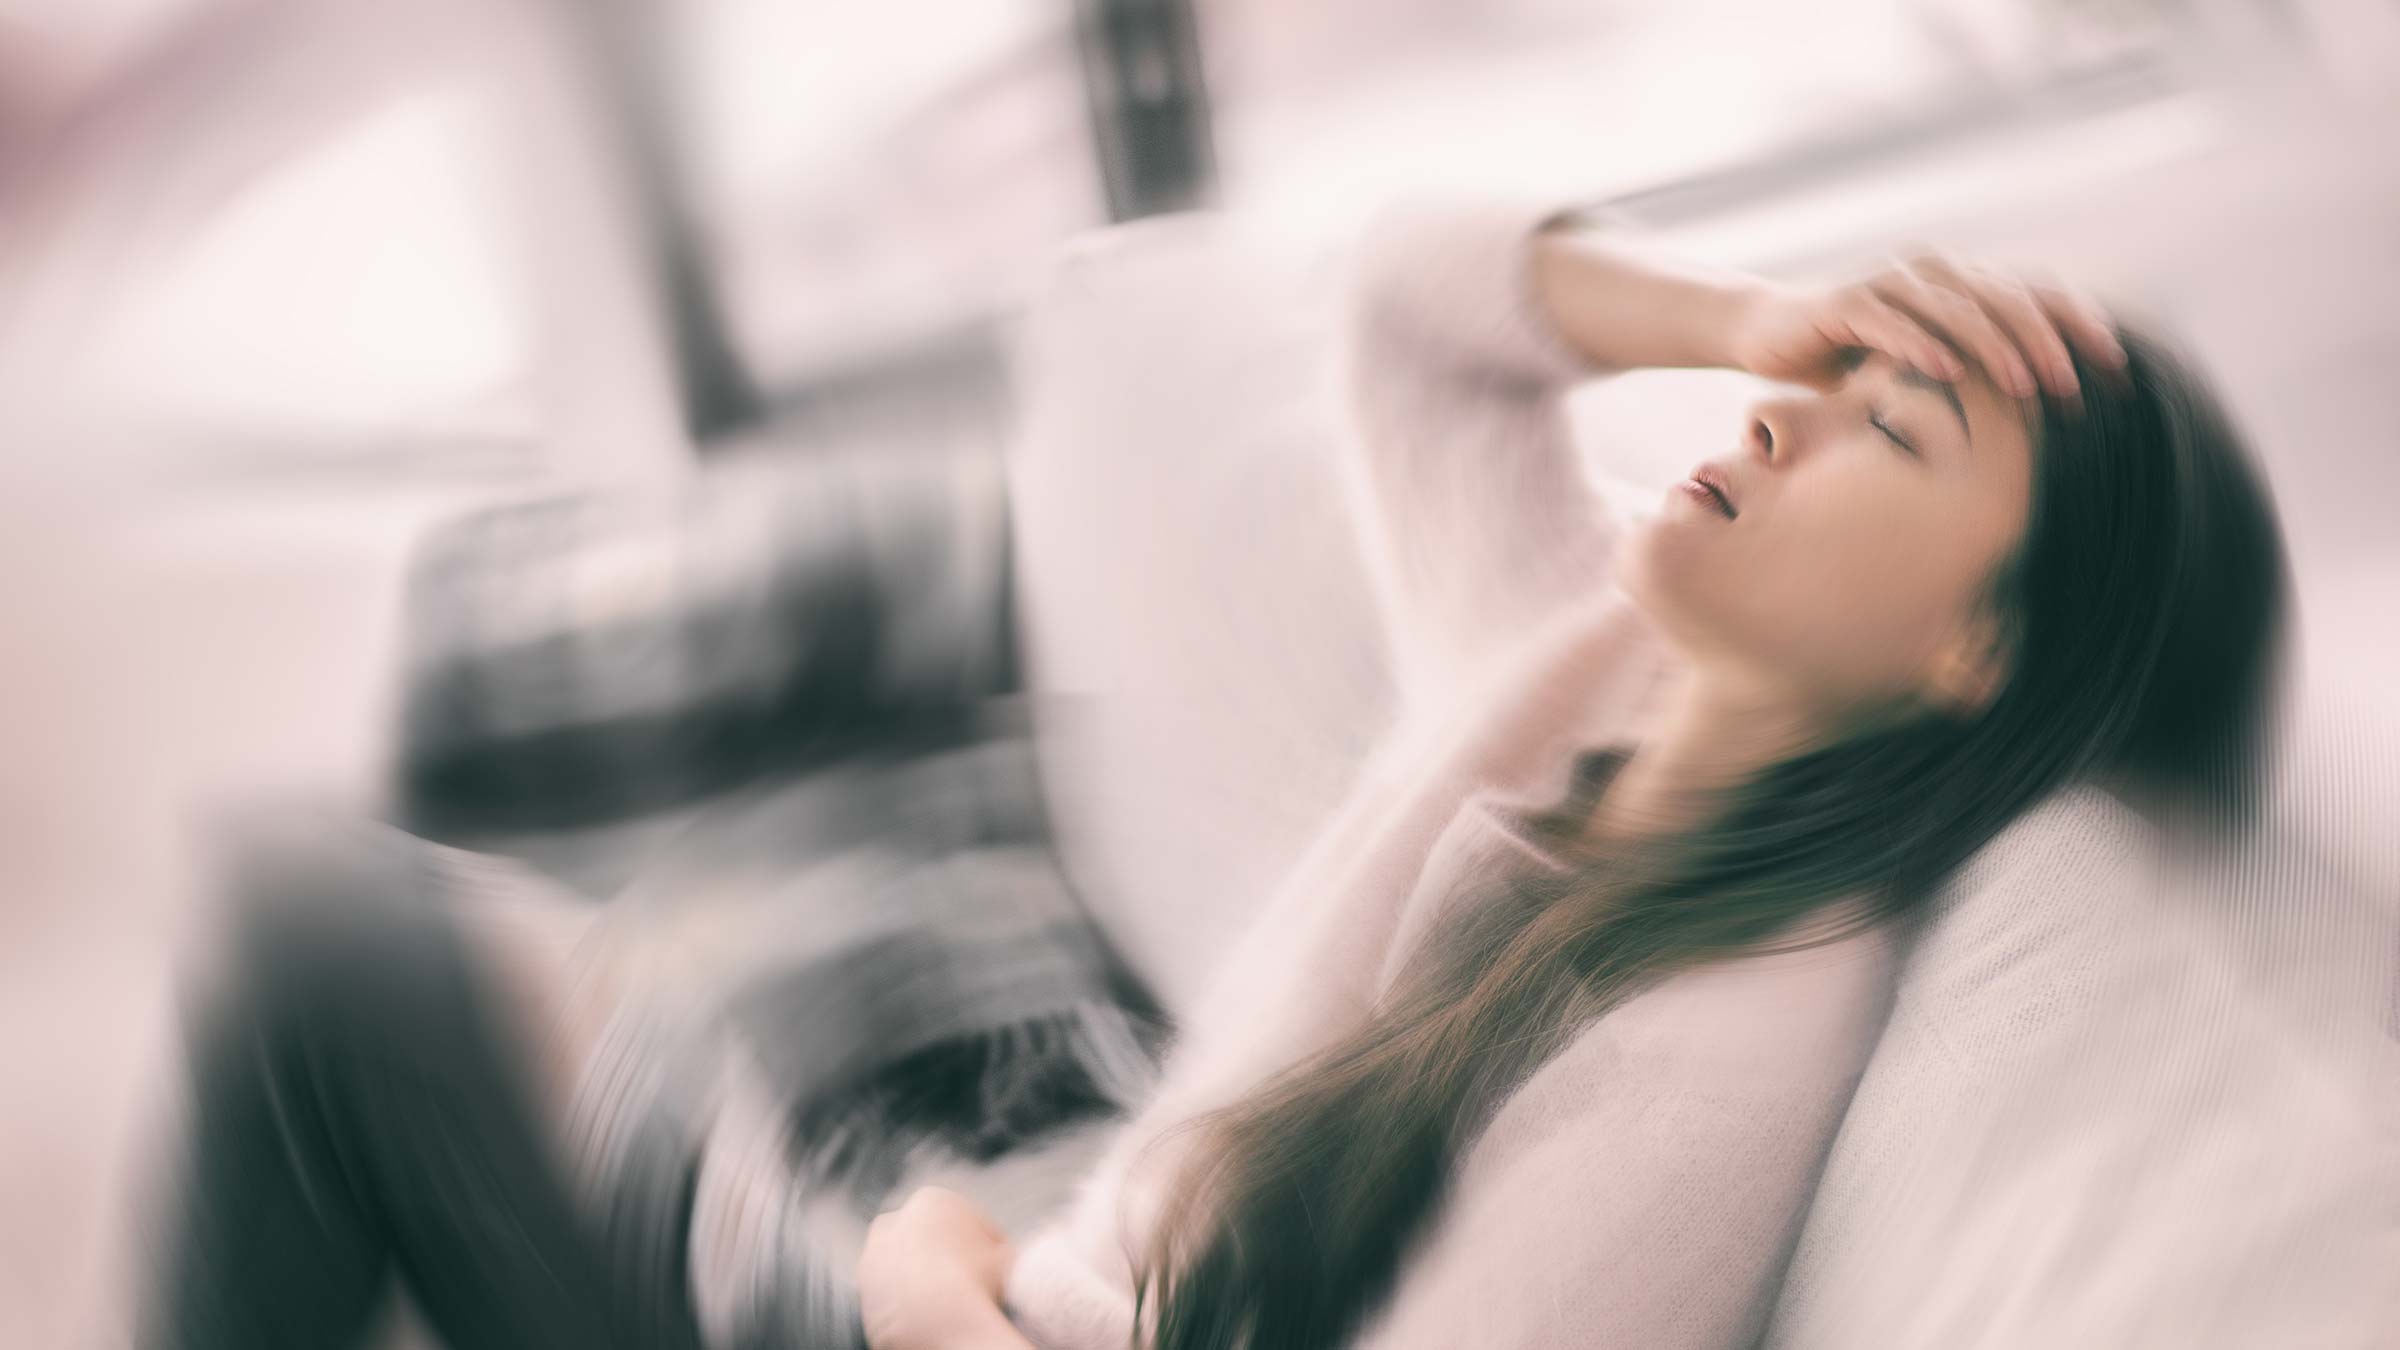 Blurry motion image of a woman holding her head and falling onto a couch